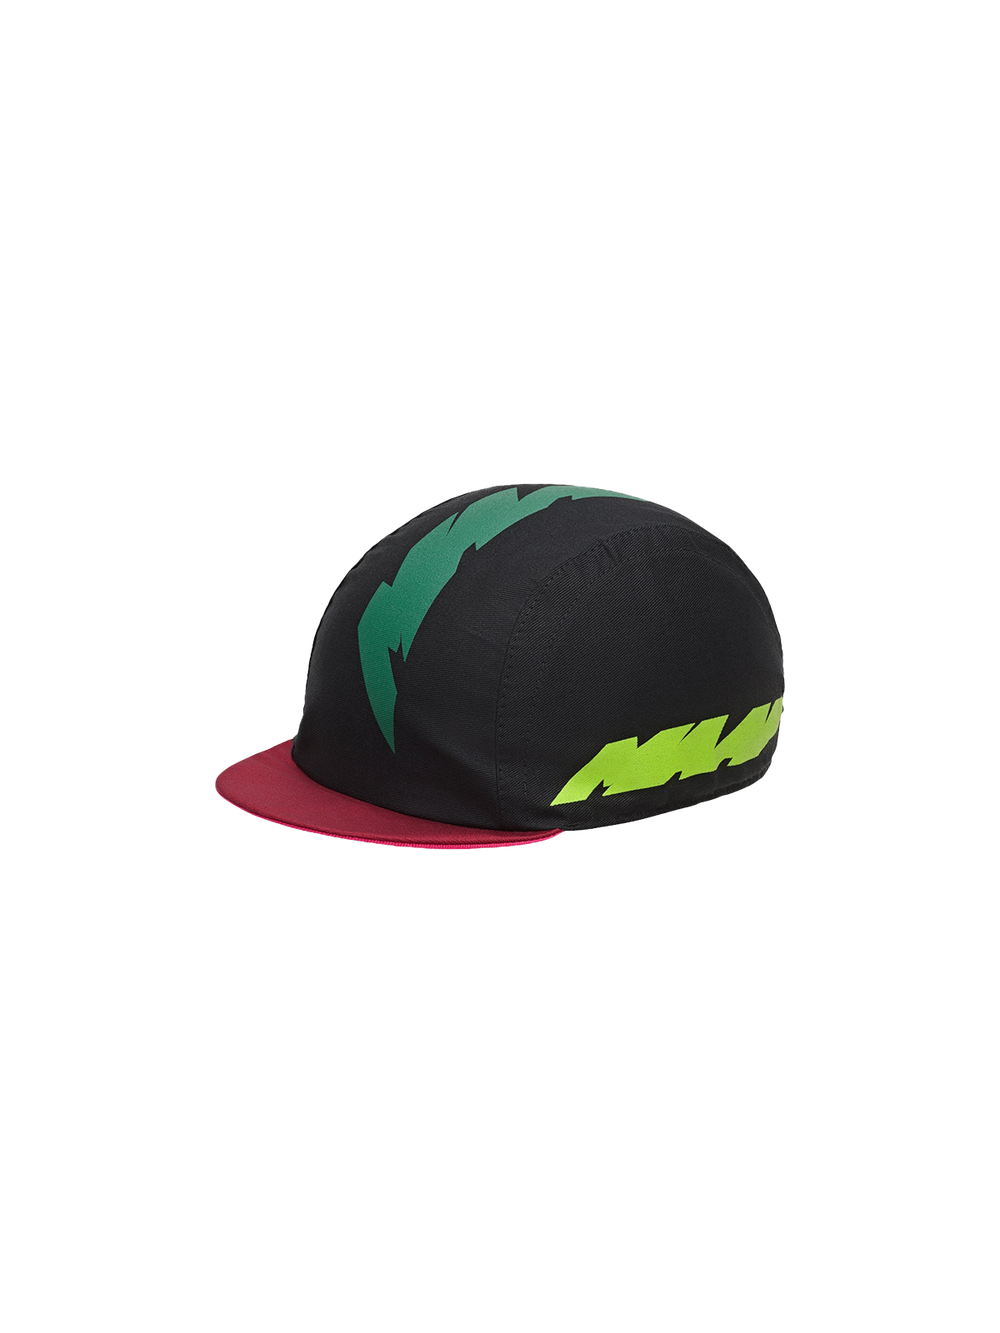 Product Image for Eclipse Cap